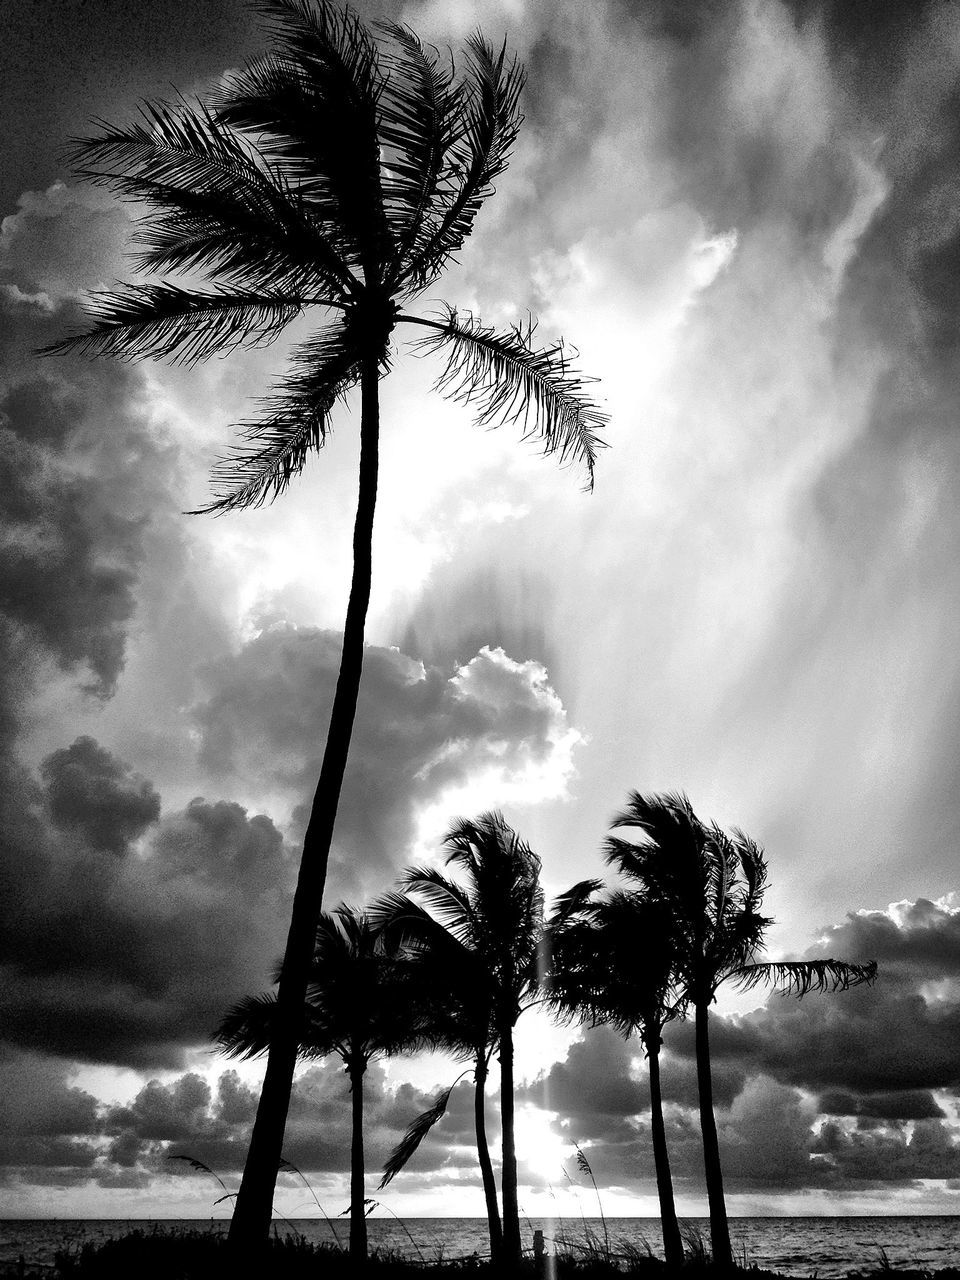 tree, sky, tranquility, tree trunk, tranquil scene, silhouette, cloud - sky, scenics, beauty in nature, palm tree, nature, cloudy, growth, cloud, branch, low angle view, beach, idyllic, non-urban scene, landscape